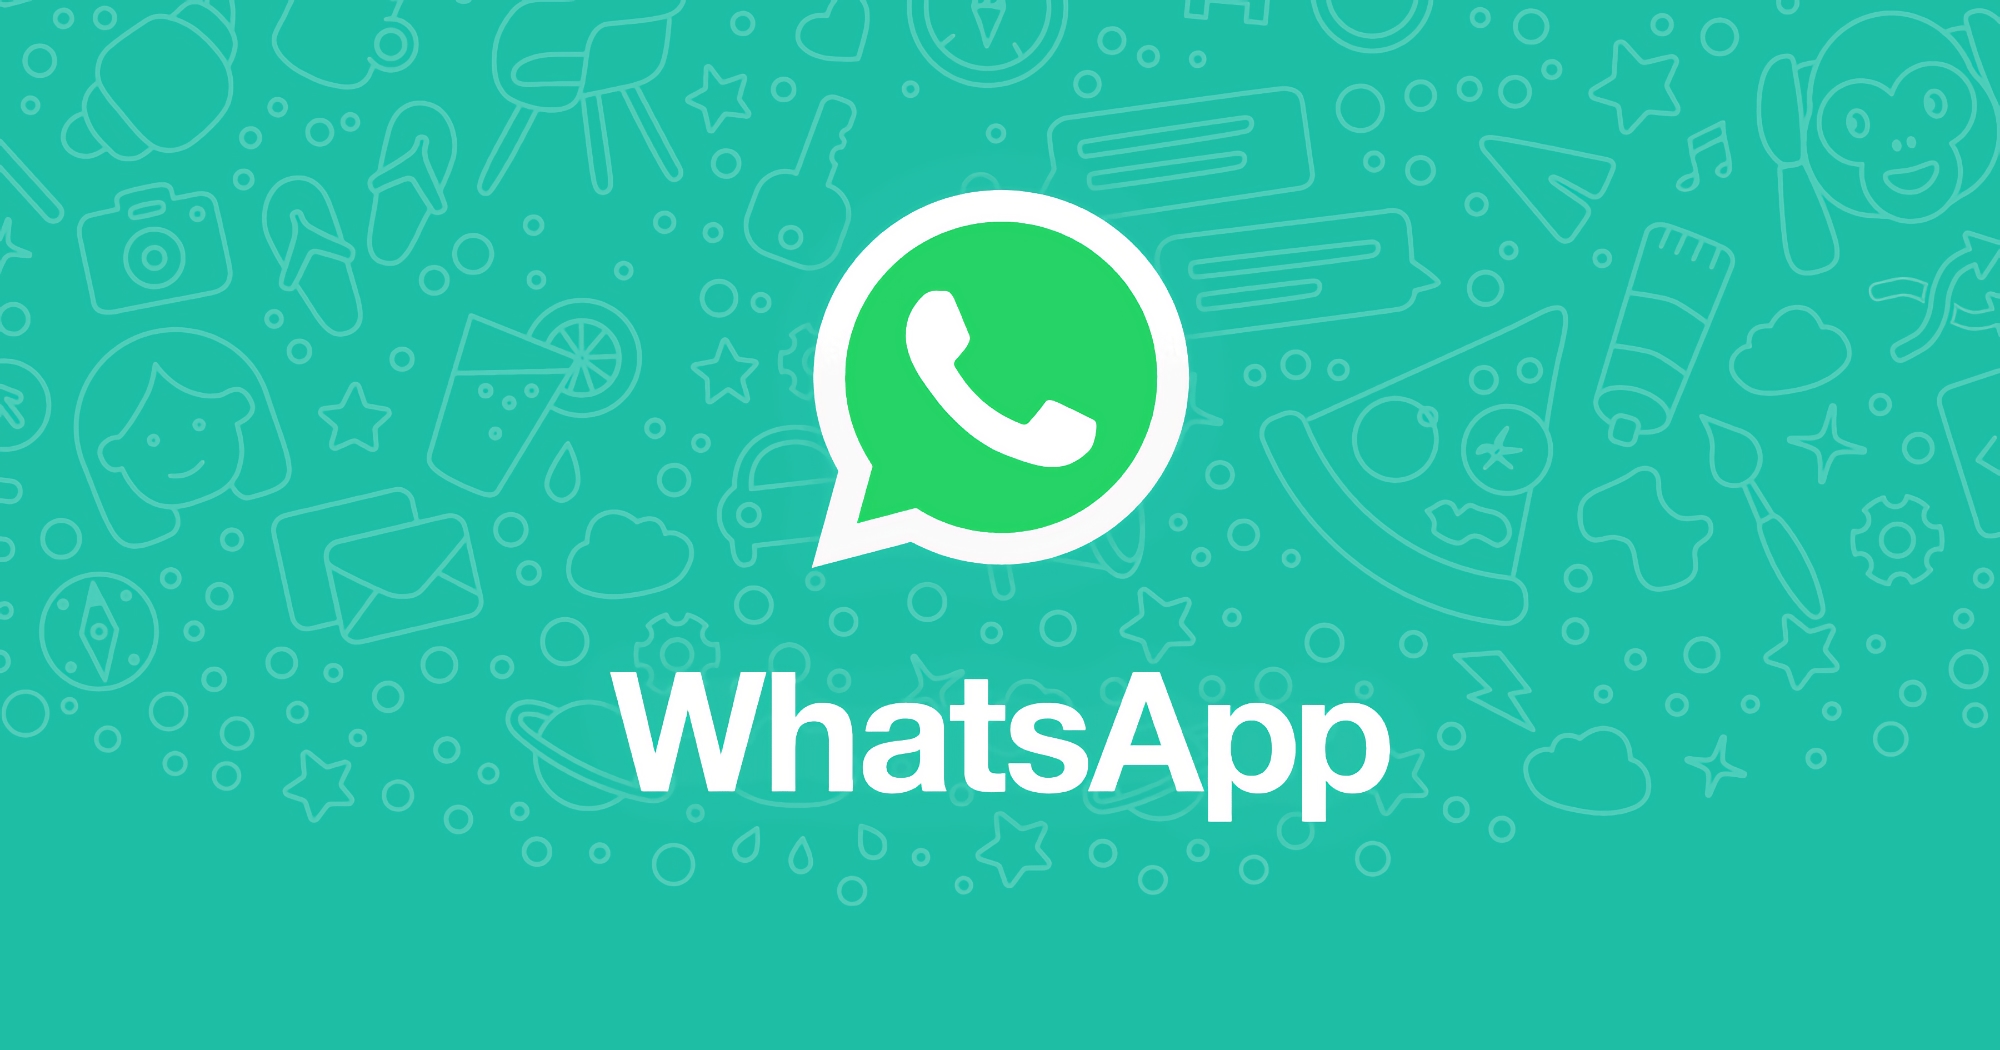 WhatsApp now allows you to transfer history from Android to iPhone: here's how it works